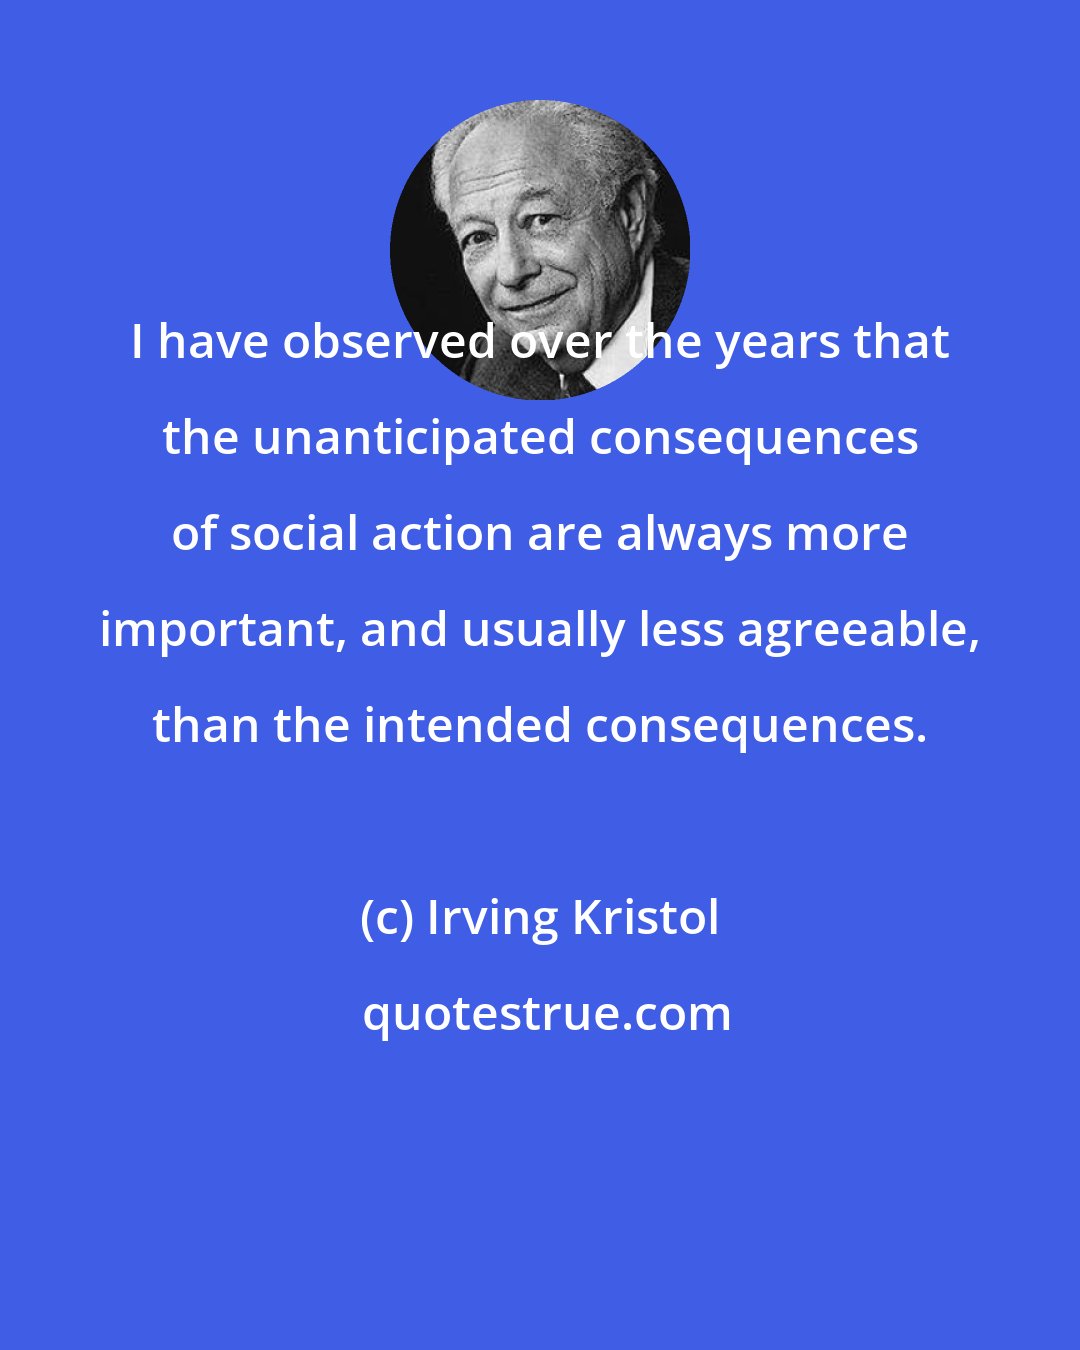 Irving Kristol: I have observed over the years that the unanticipated consequences of social action are always more important, and usually less agreeable, than the intended consequences.